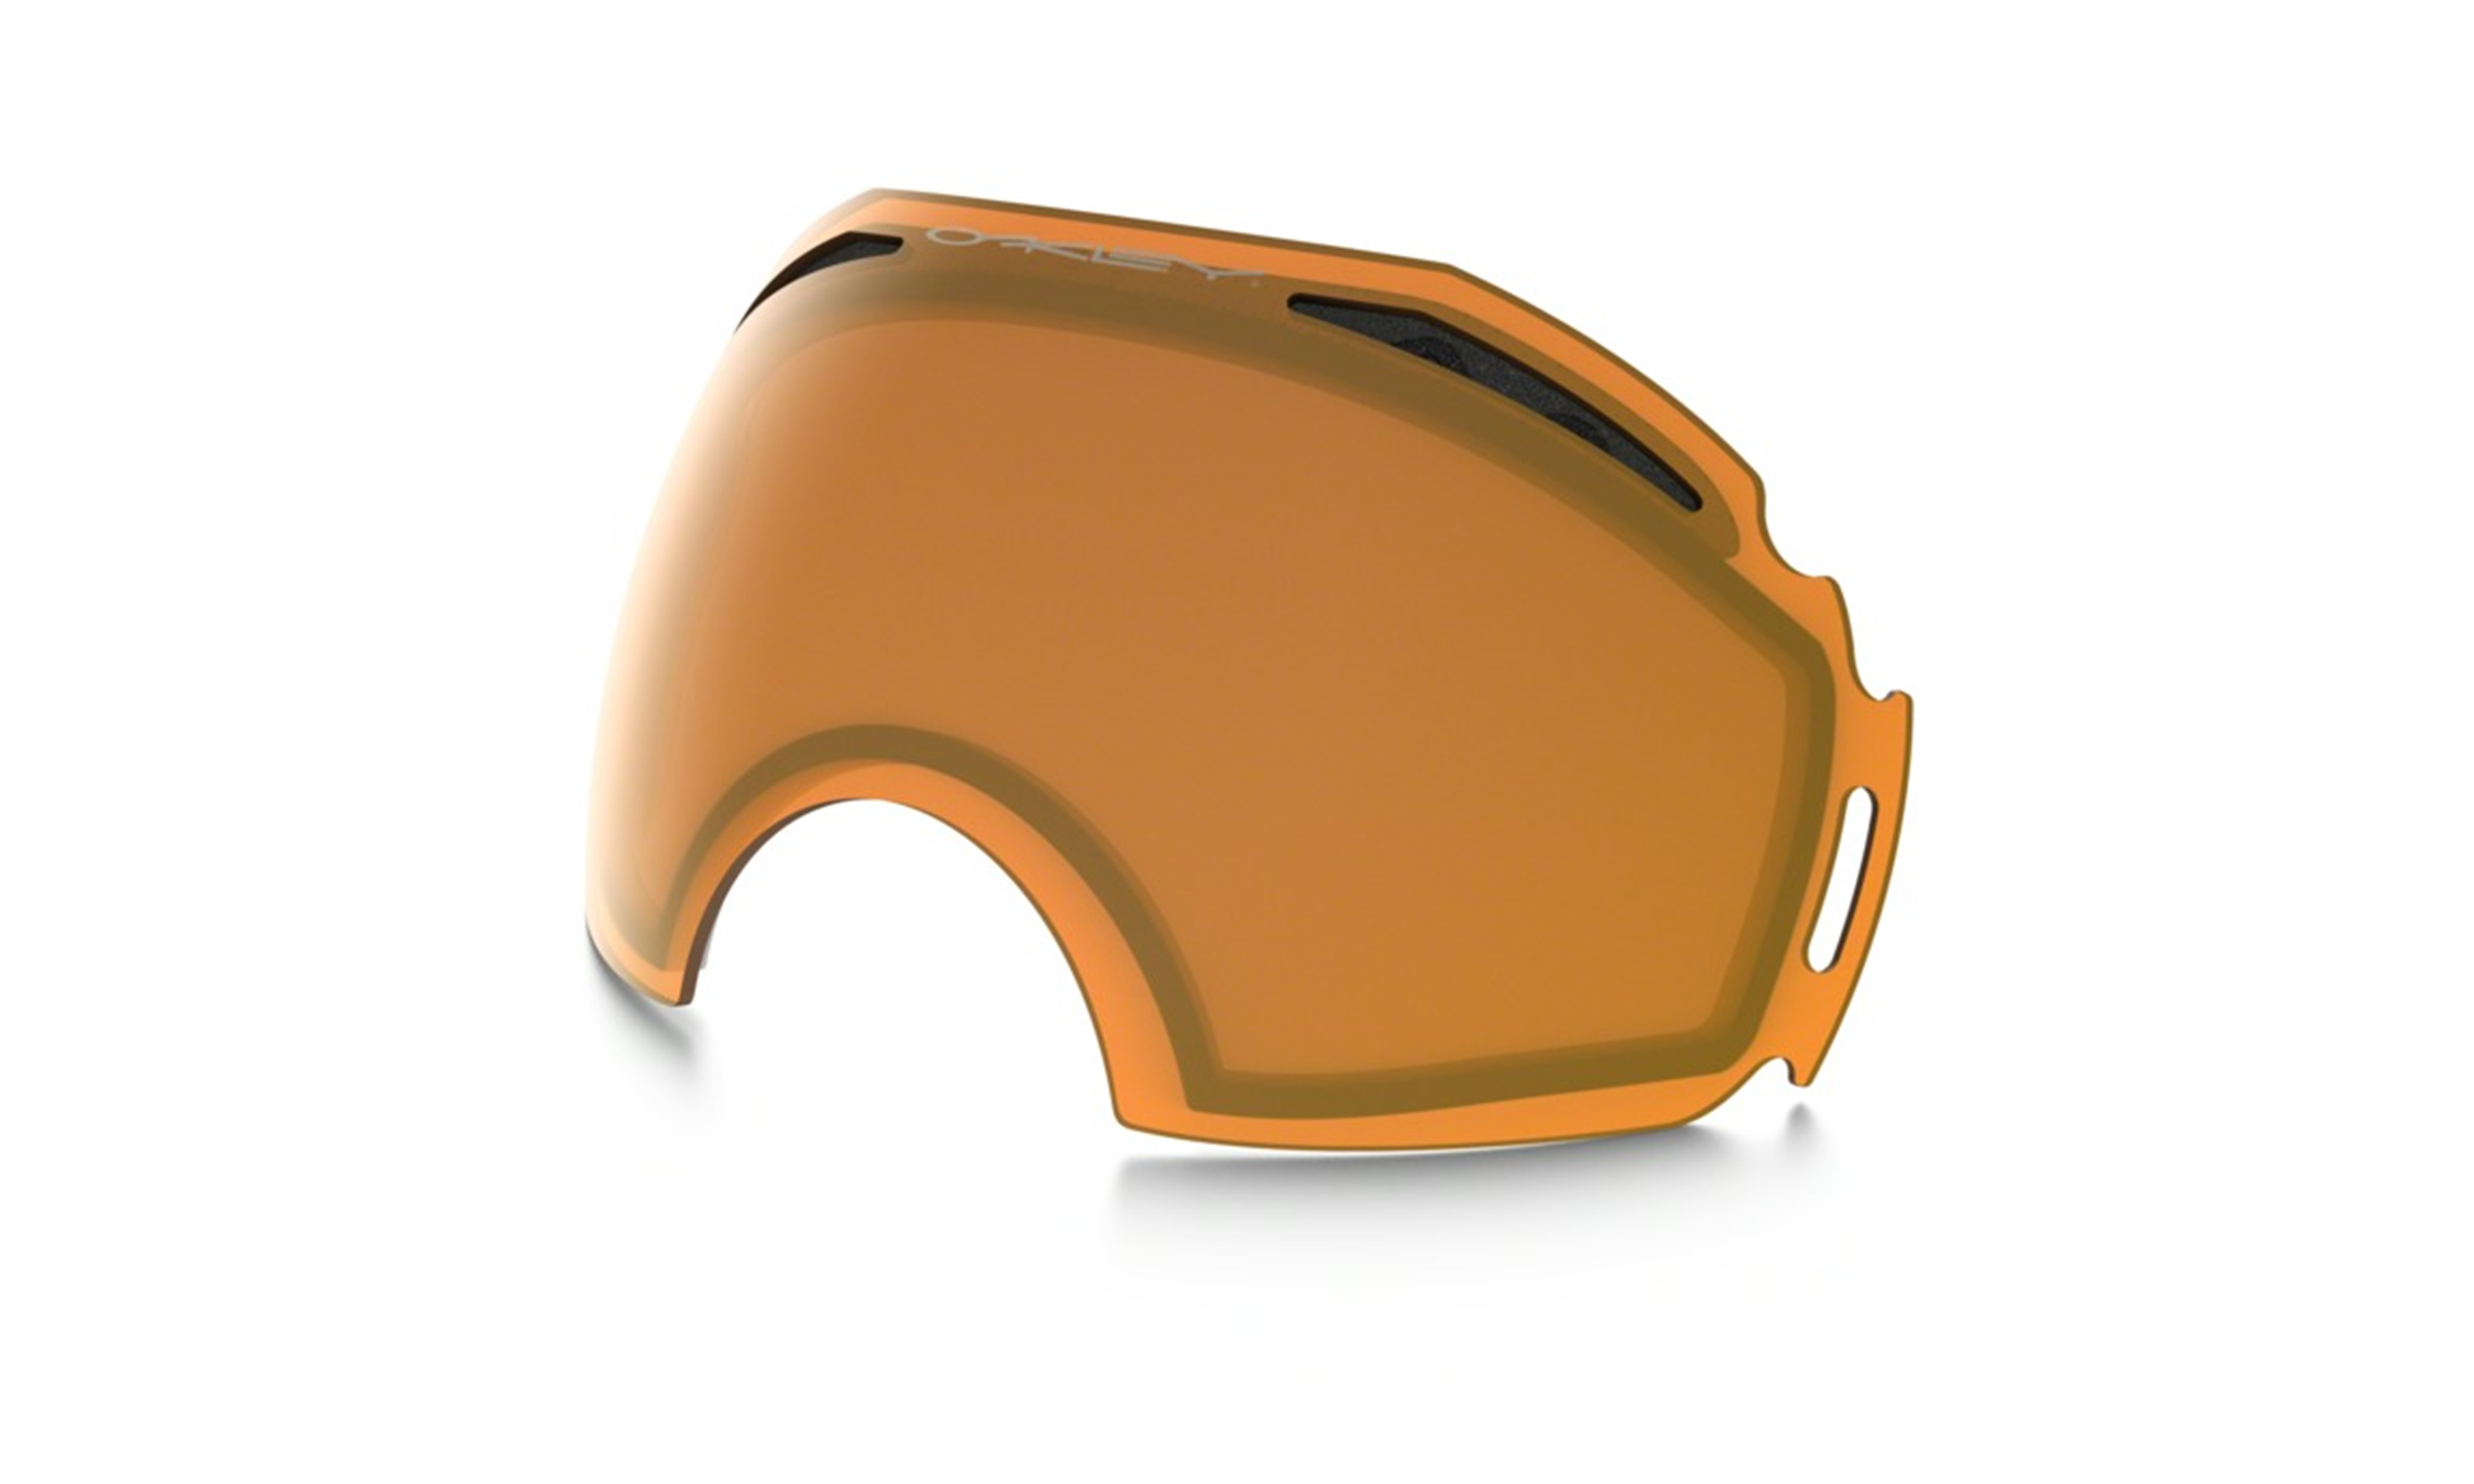 oakley goggle replacement lenses